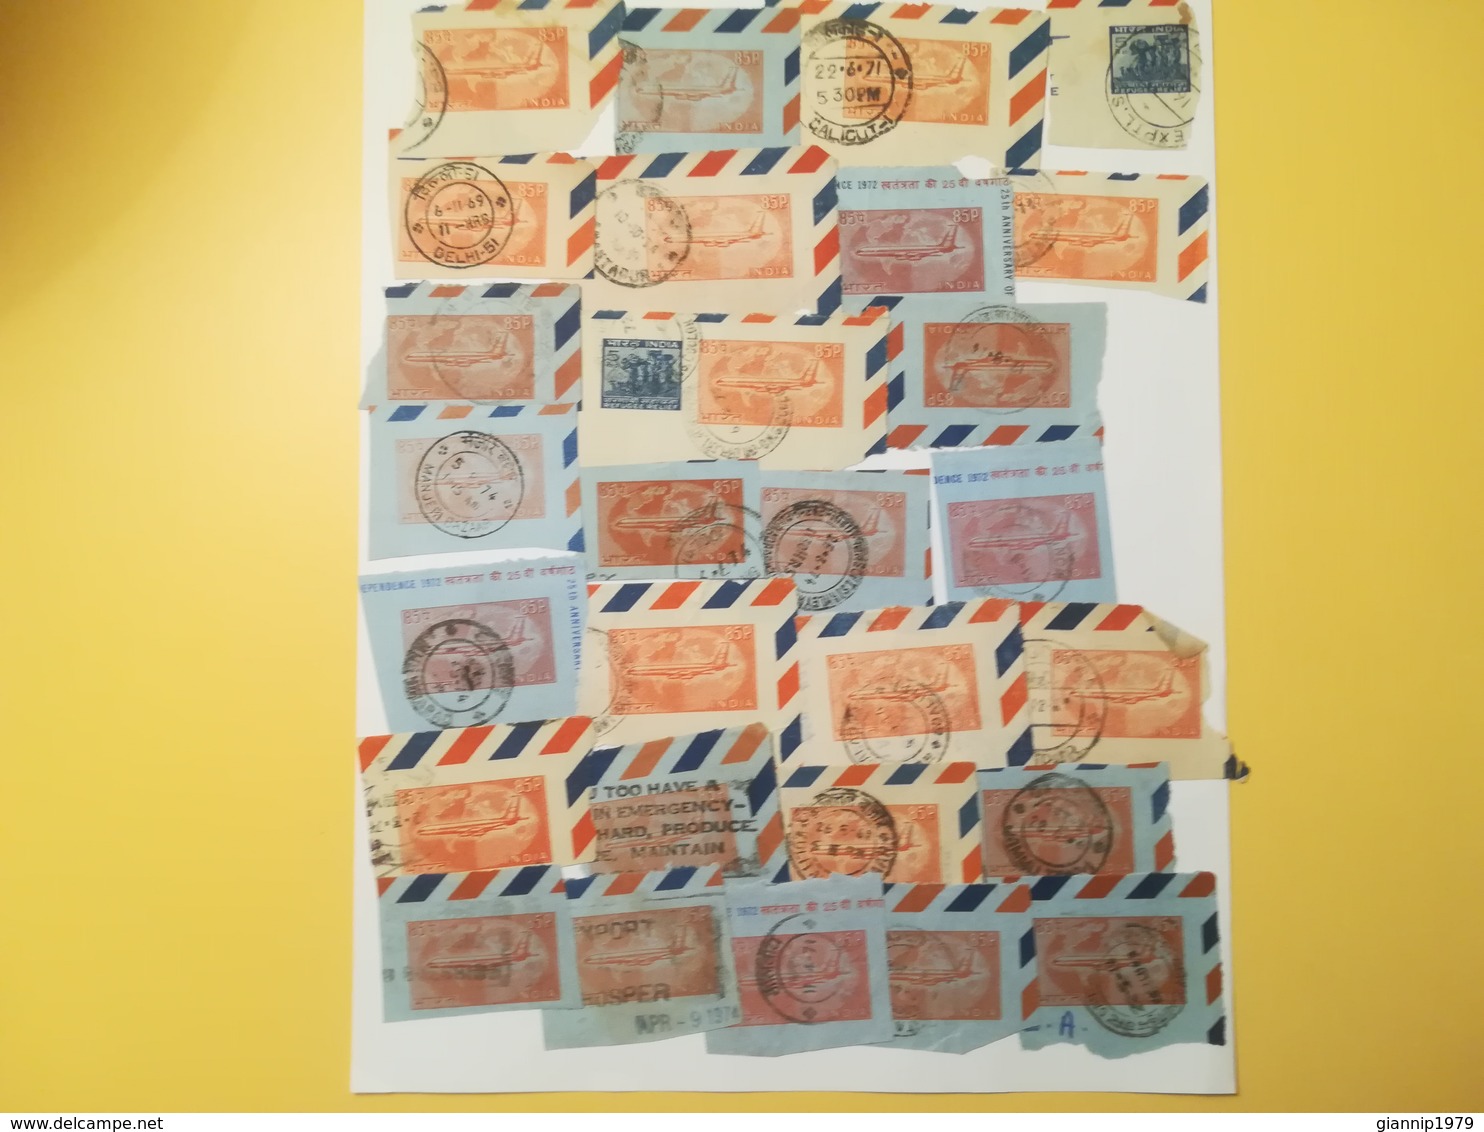 PAGINA PAGE ALBUM INDIA 1970 AIR MAIL FRAMMENTO FRAGMENT ATTACCATI PAGE WITH STAMPS COLLEZIONI LOTTO LOTS - Colecciones & Series